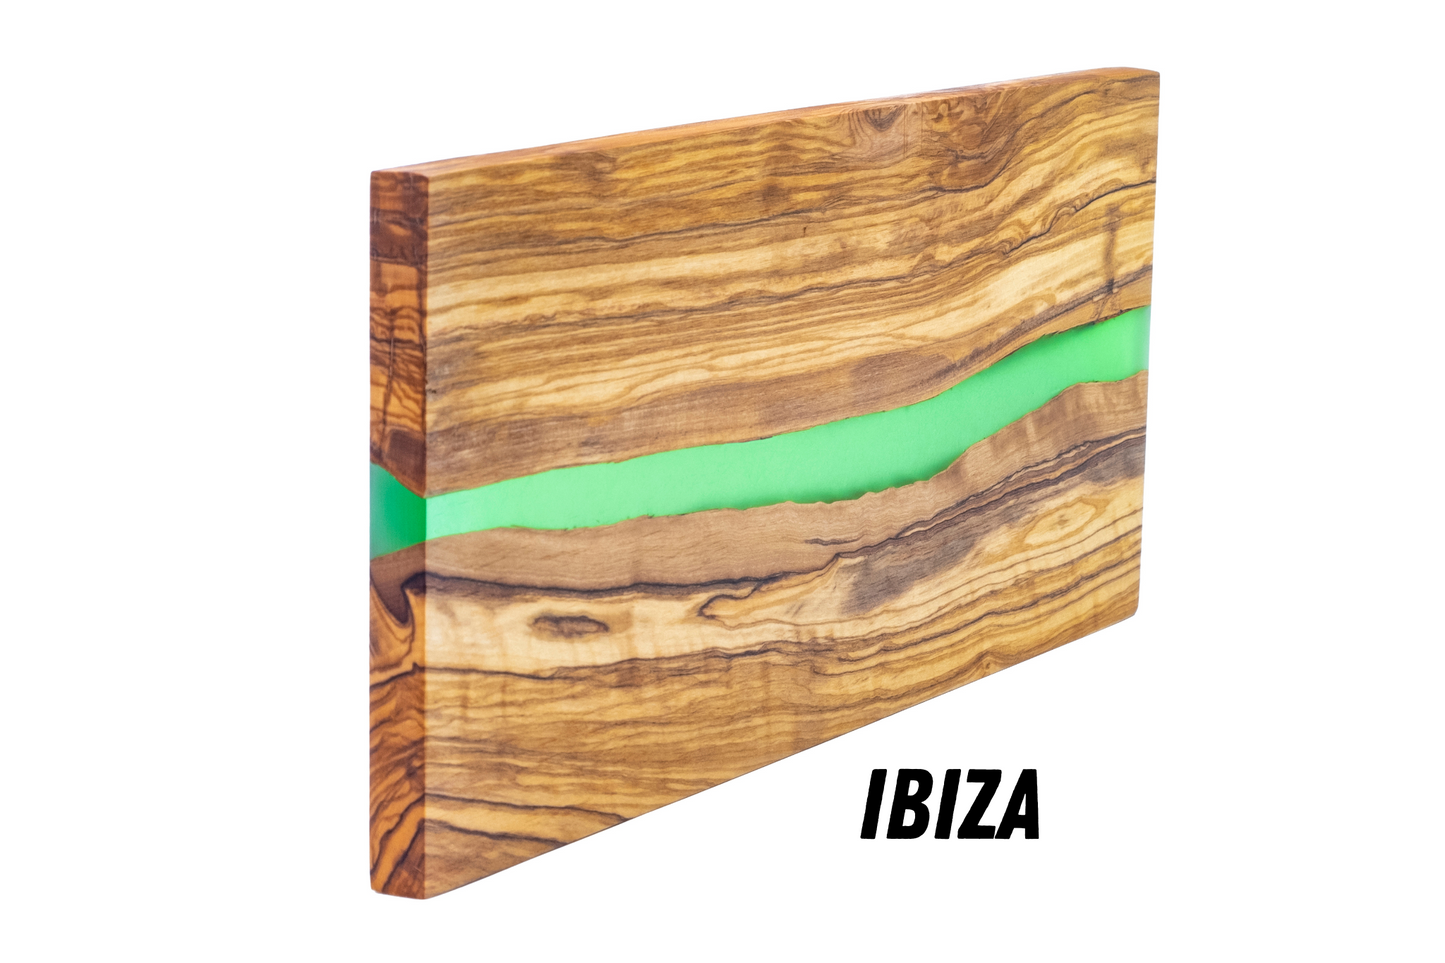 ERREKE Serving Board in Natural Olive Wood and Epoxy Resin IBIZA, Kitchen Chopping Board 38x18x1.5 cm, Ideal for Serving Sausages Ham Cheese Bread (Green)